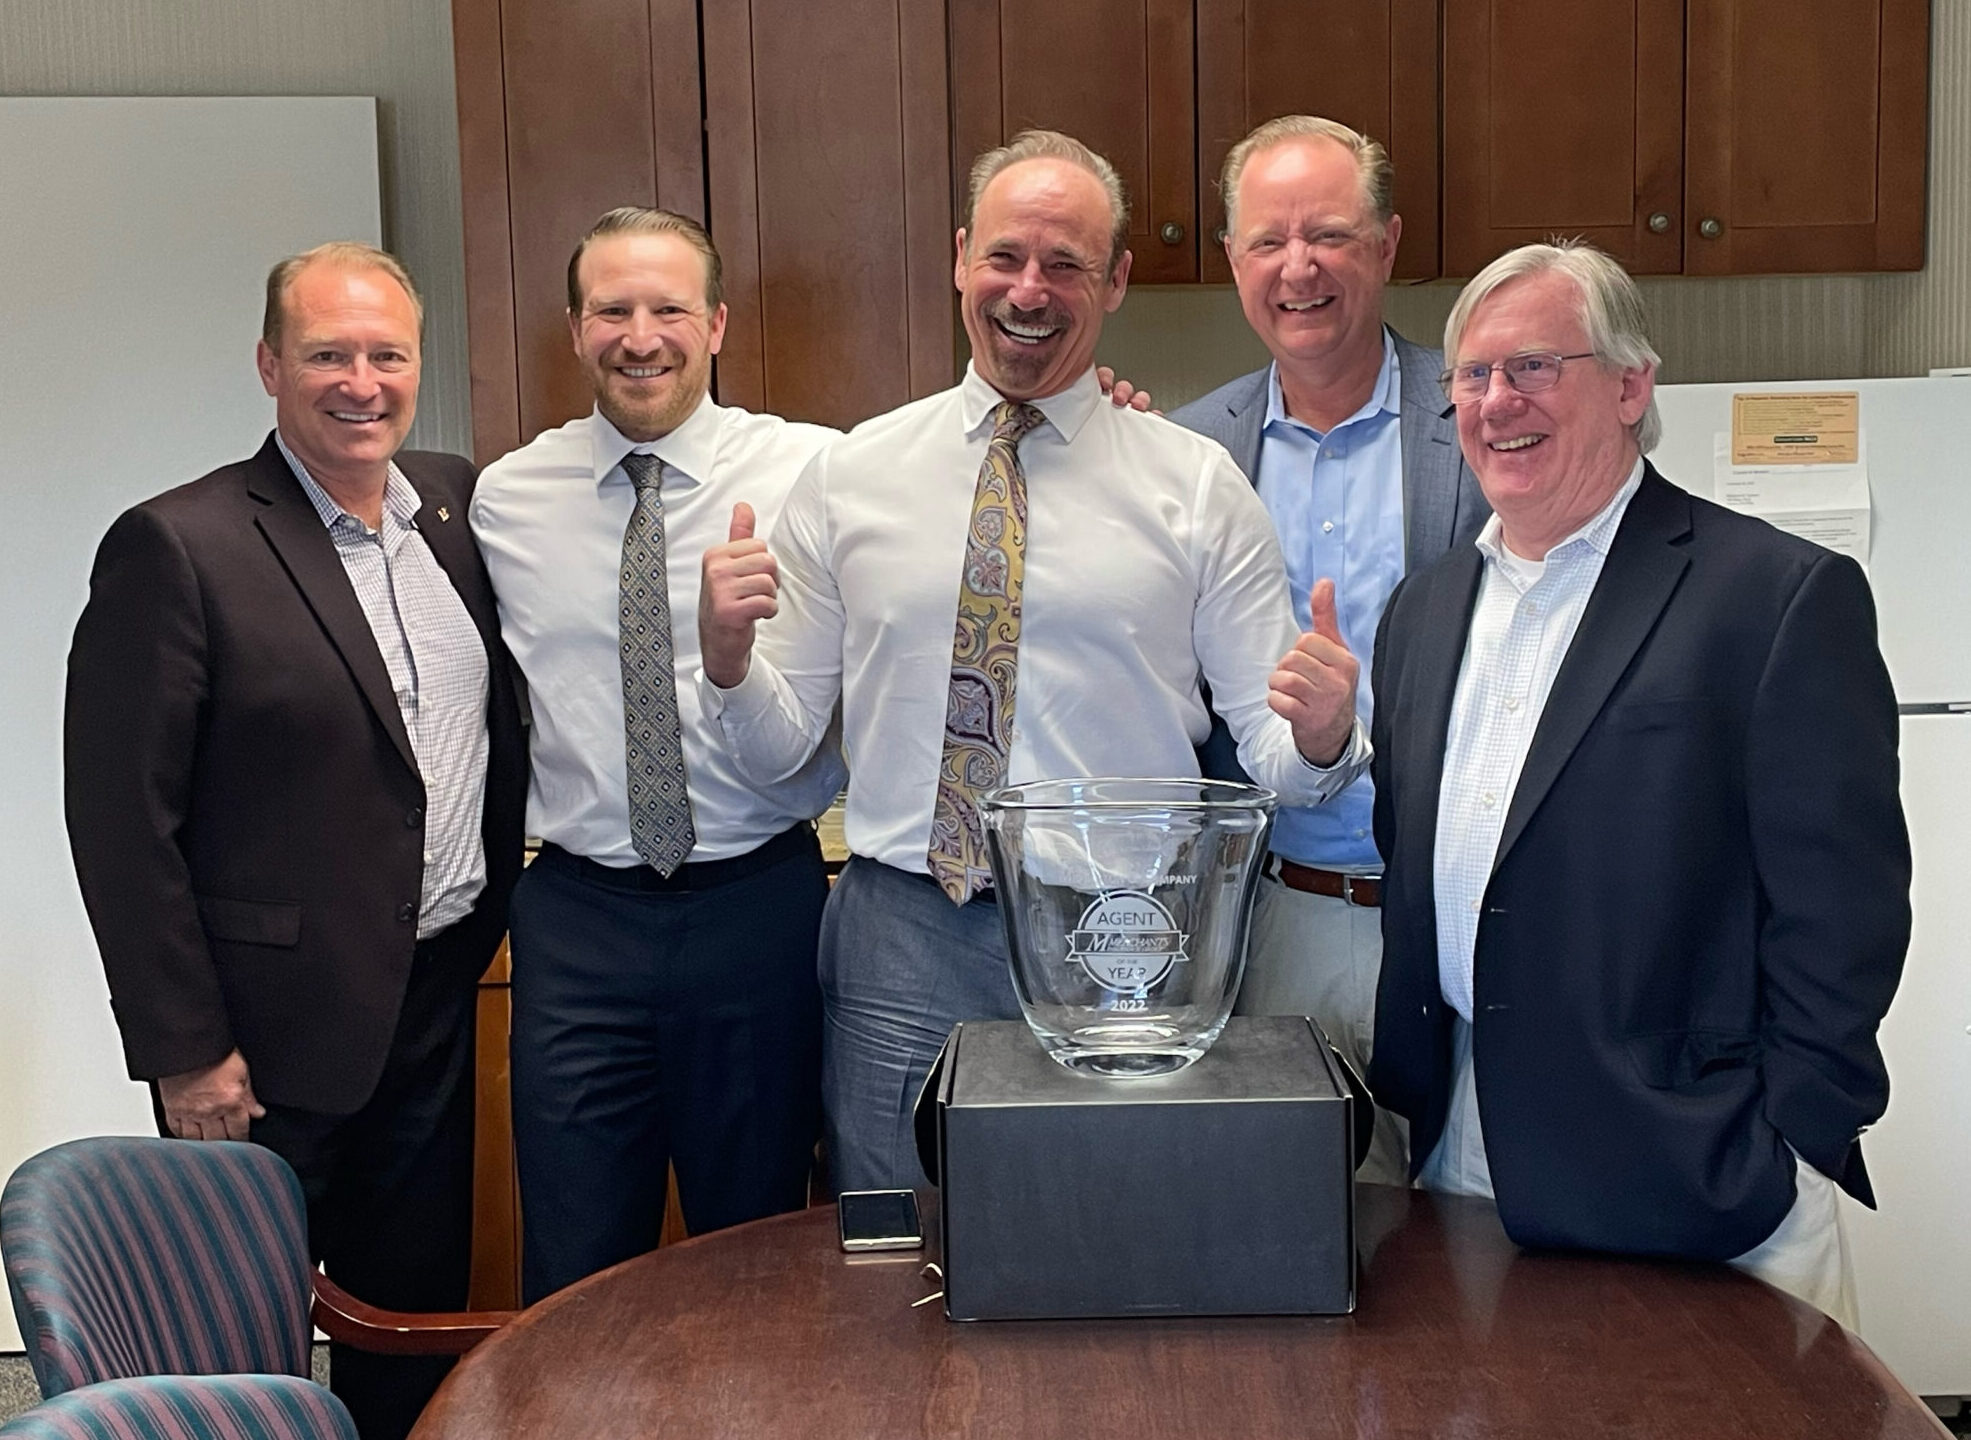 Photo of Merchants Insurance Group leaders with Middleton & Company leaders - from left, Dan Bierbrauer, David Gaynor, Richard Gaynor, Charles Makey, Rich Chichester